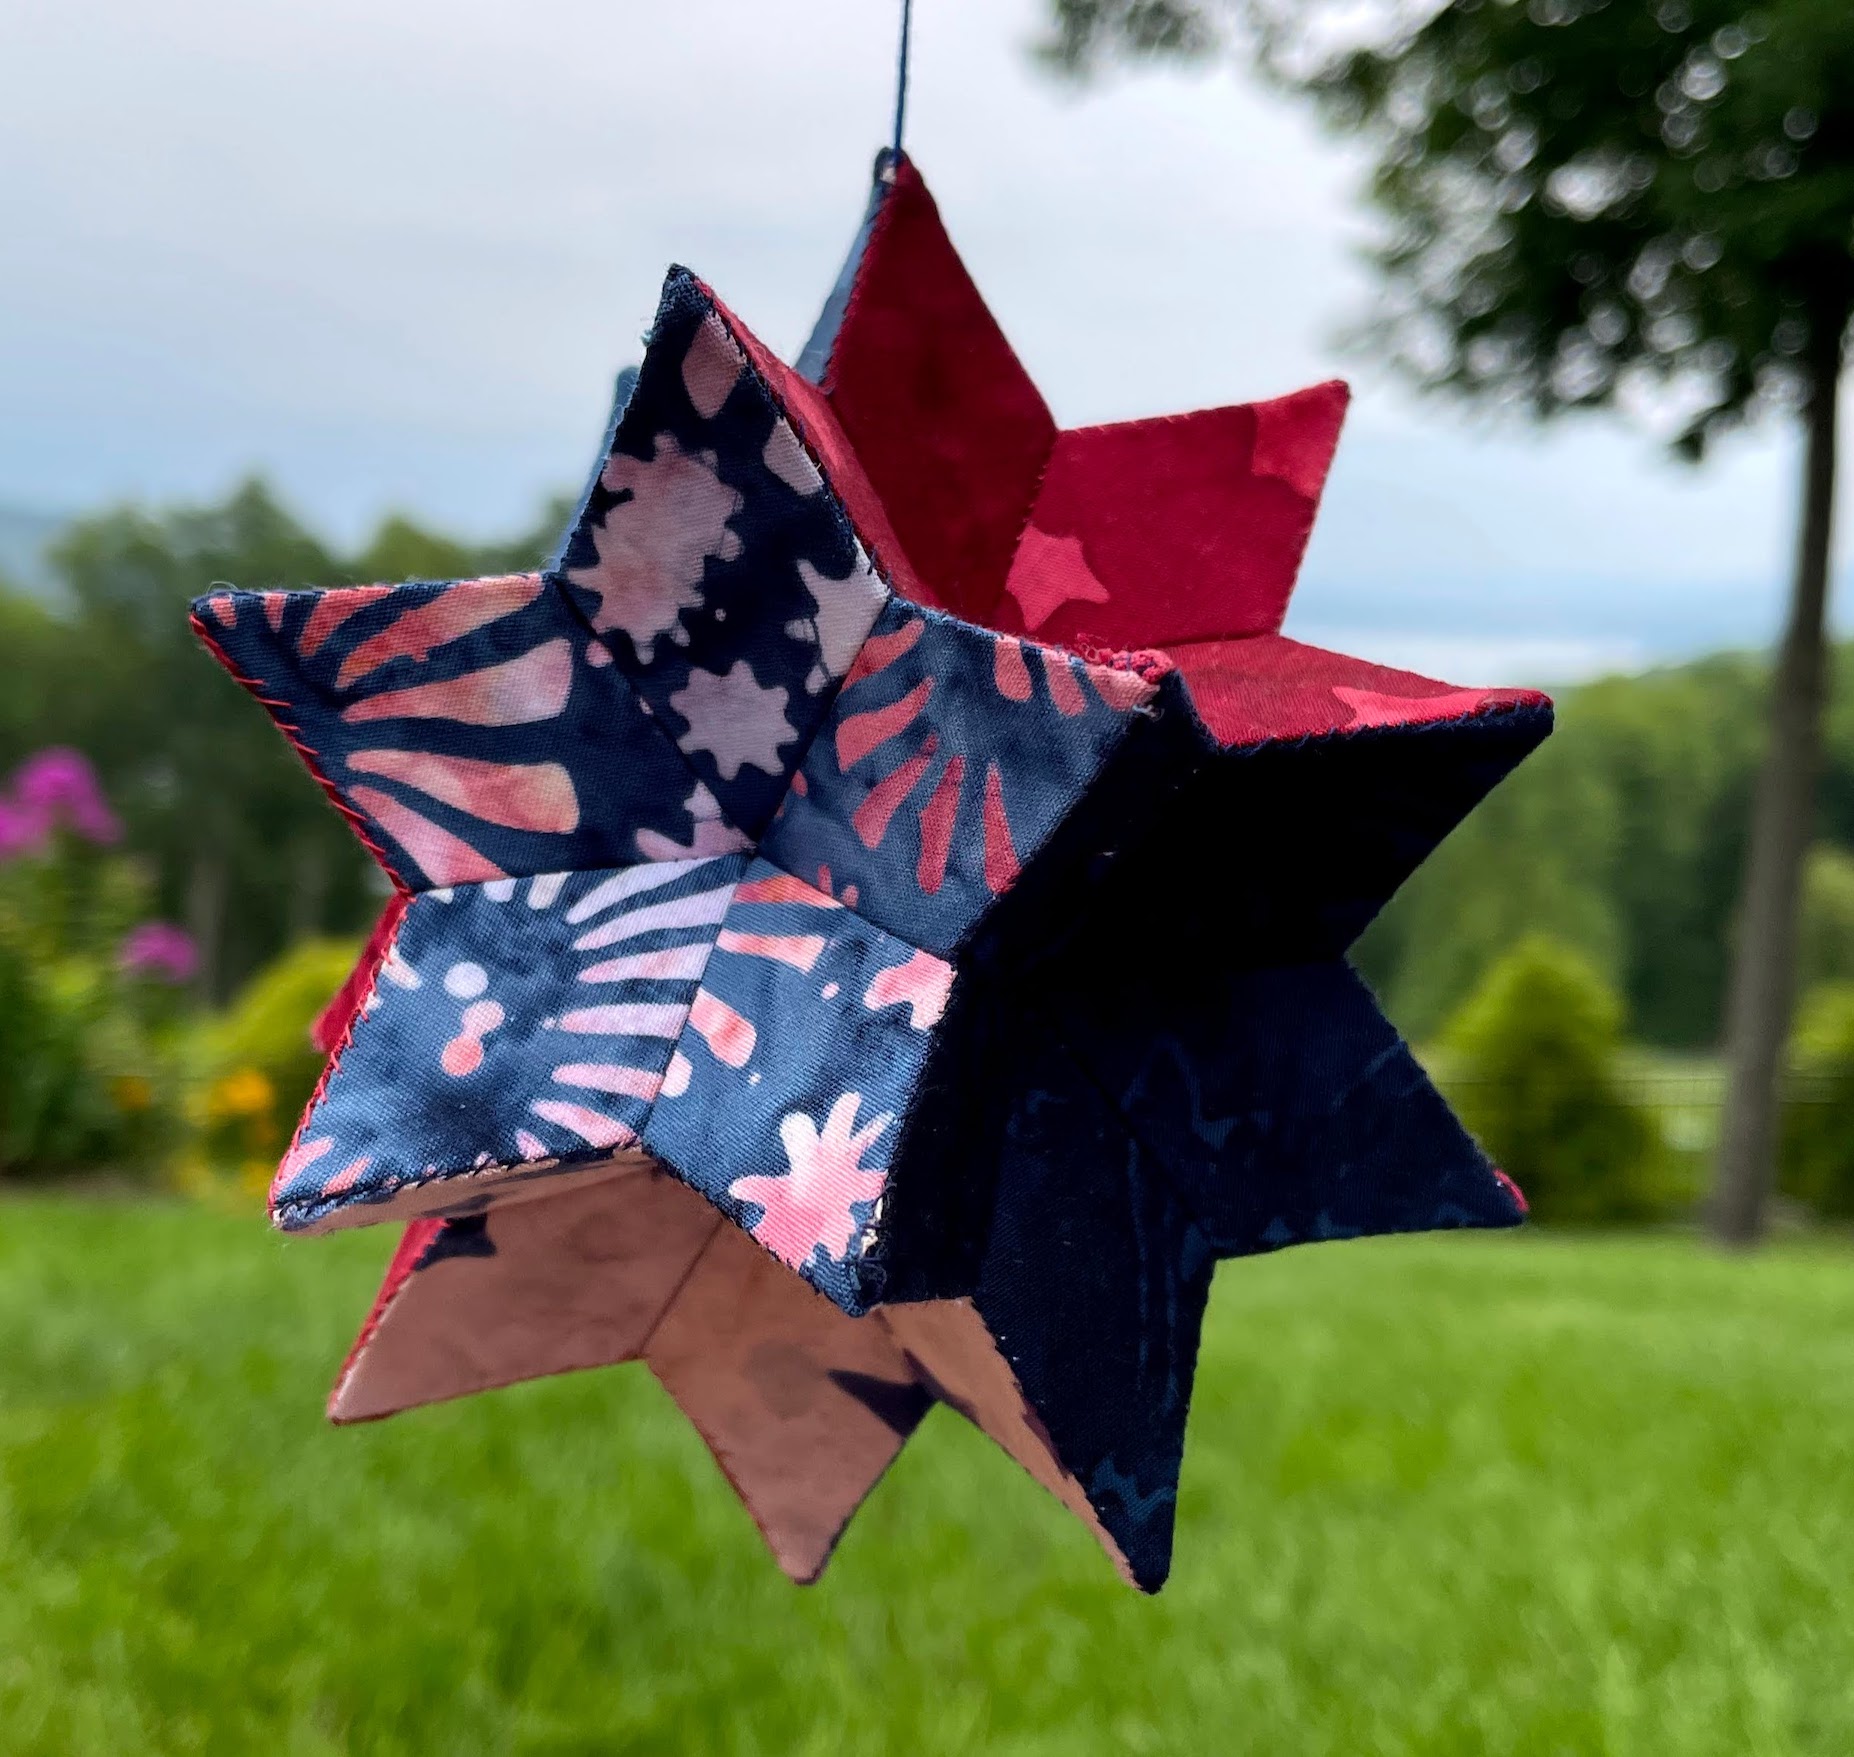 Moravian Star with Accuquilt • Dizzy Quilter